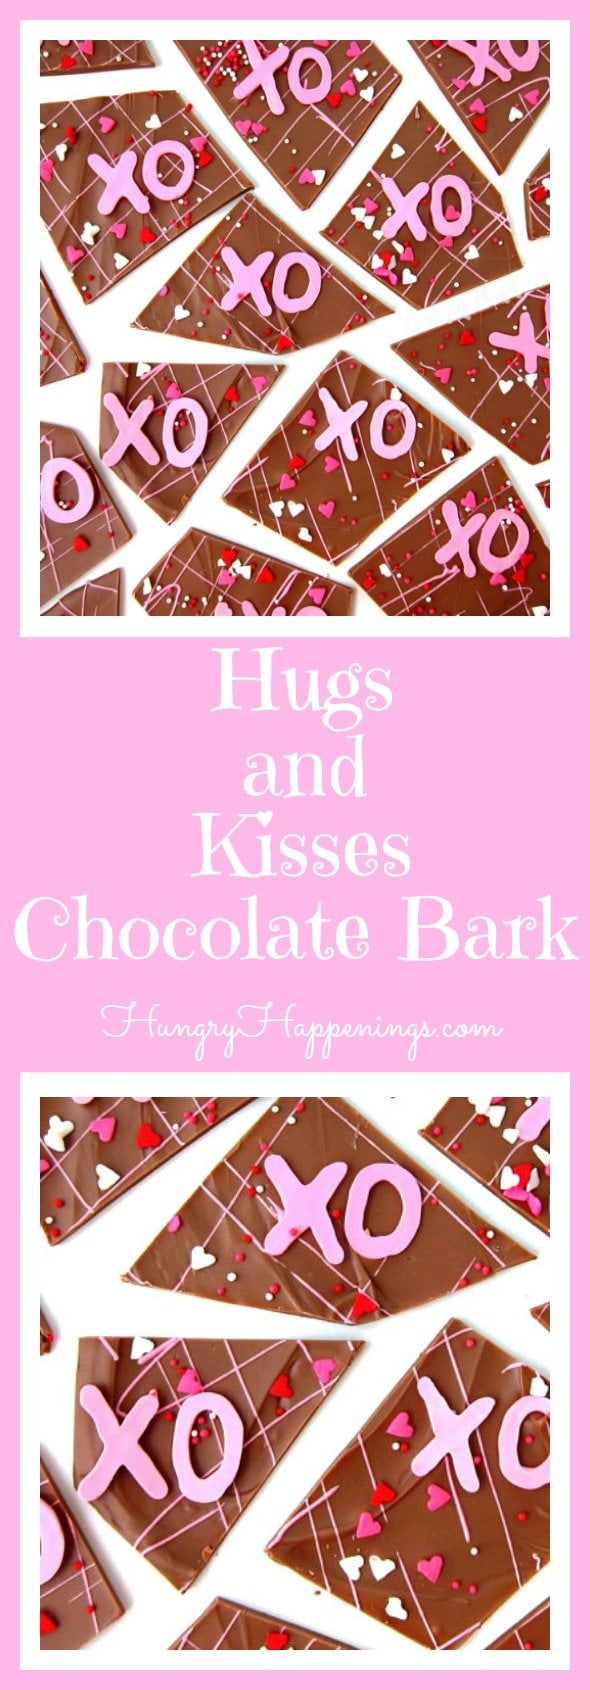 Show your loved ones how much you care by making them some Hugs and Kisses Chocolate Bark. This sweet milk chocolate bark is sprinkled with bright pink X's and O's and is a perfect Valentine's Day treat.